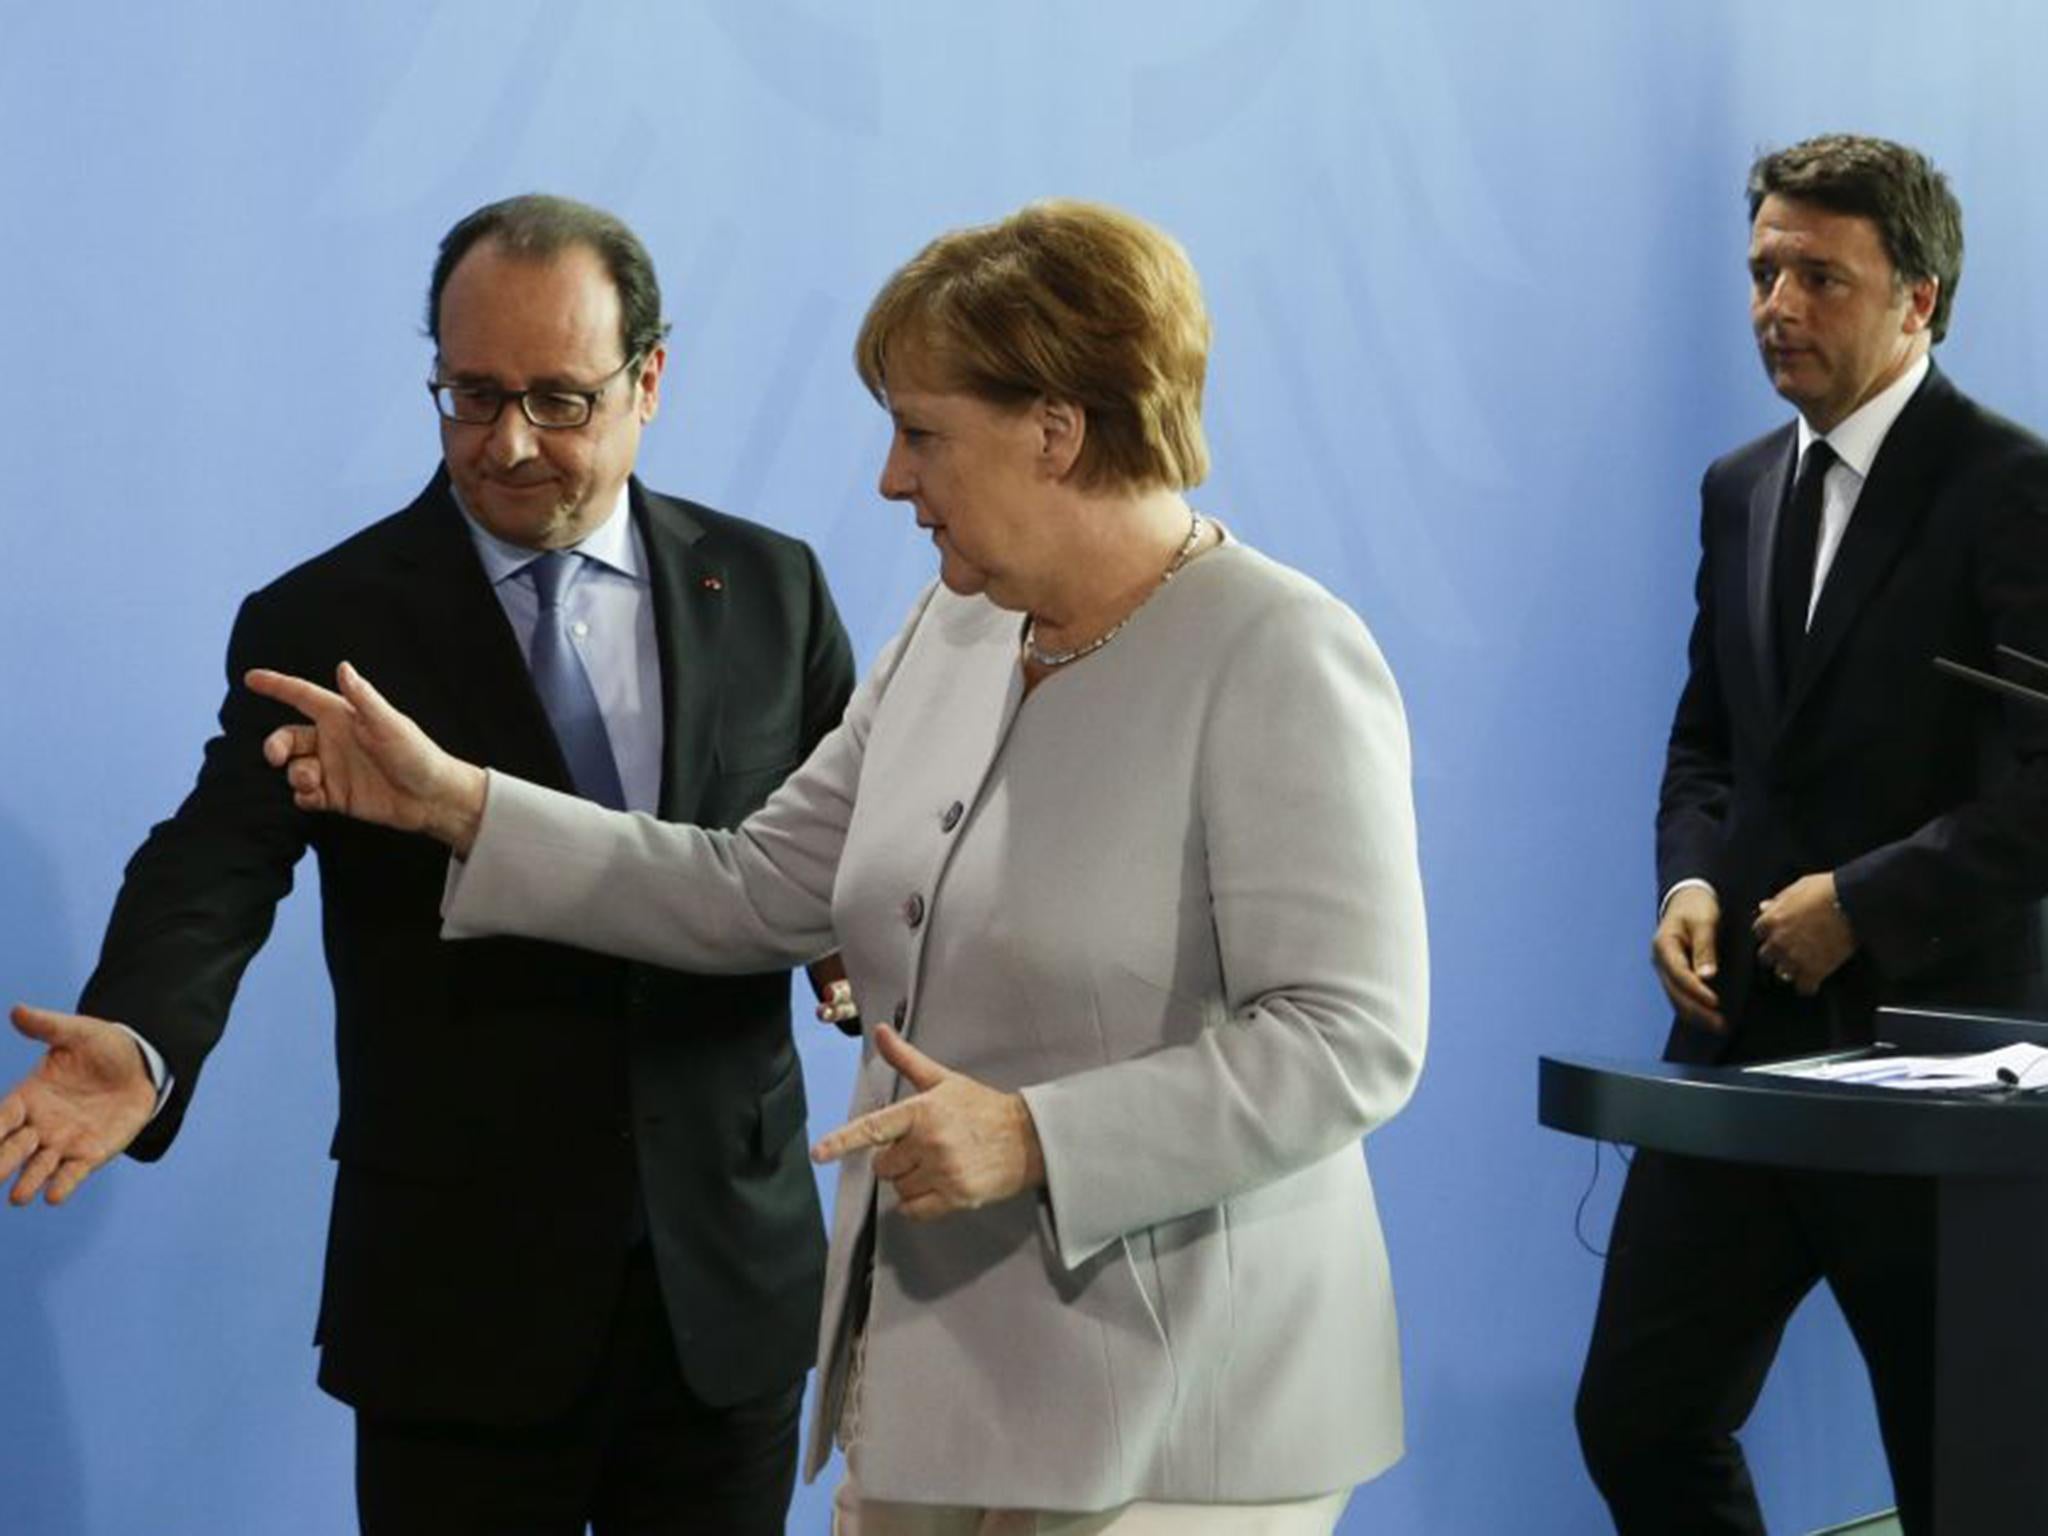 German Chancellor Angela Merkel, center, the Prime Minister of Italy Matteo Renzi, right, and the President of France Francois Hollande, left, leave a news conference during a meeting at the chancellery in Berlin in June